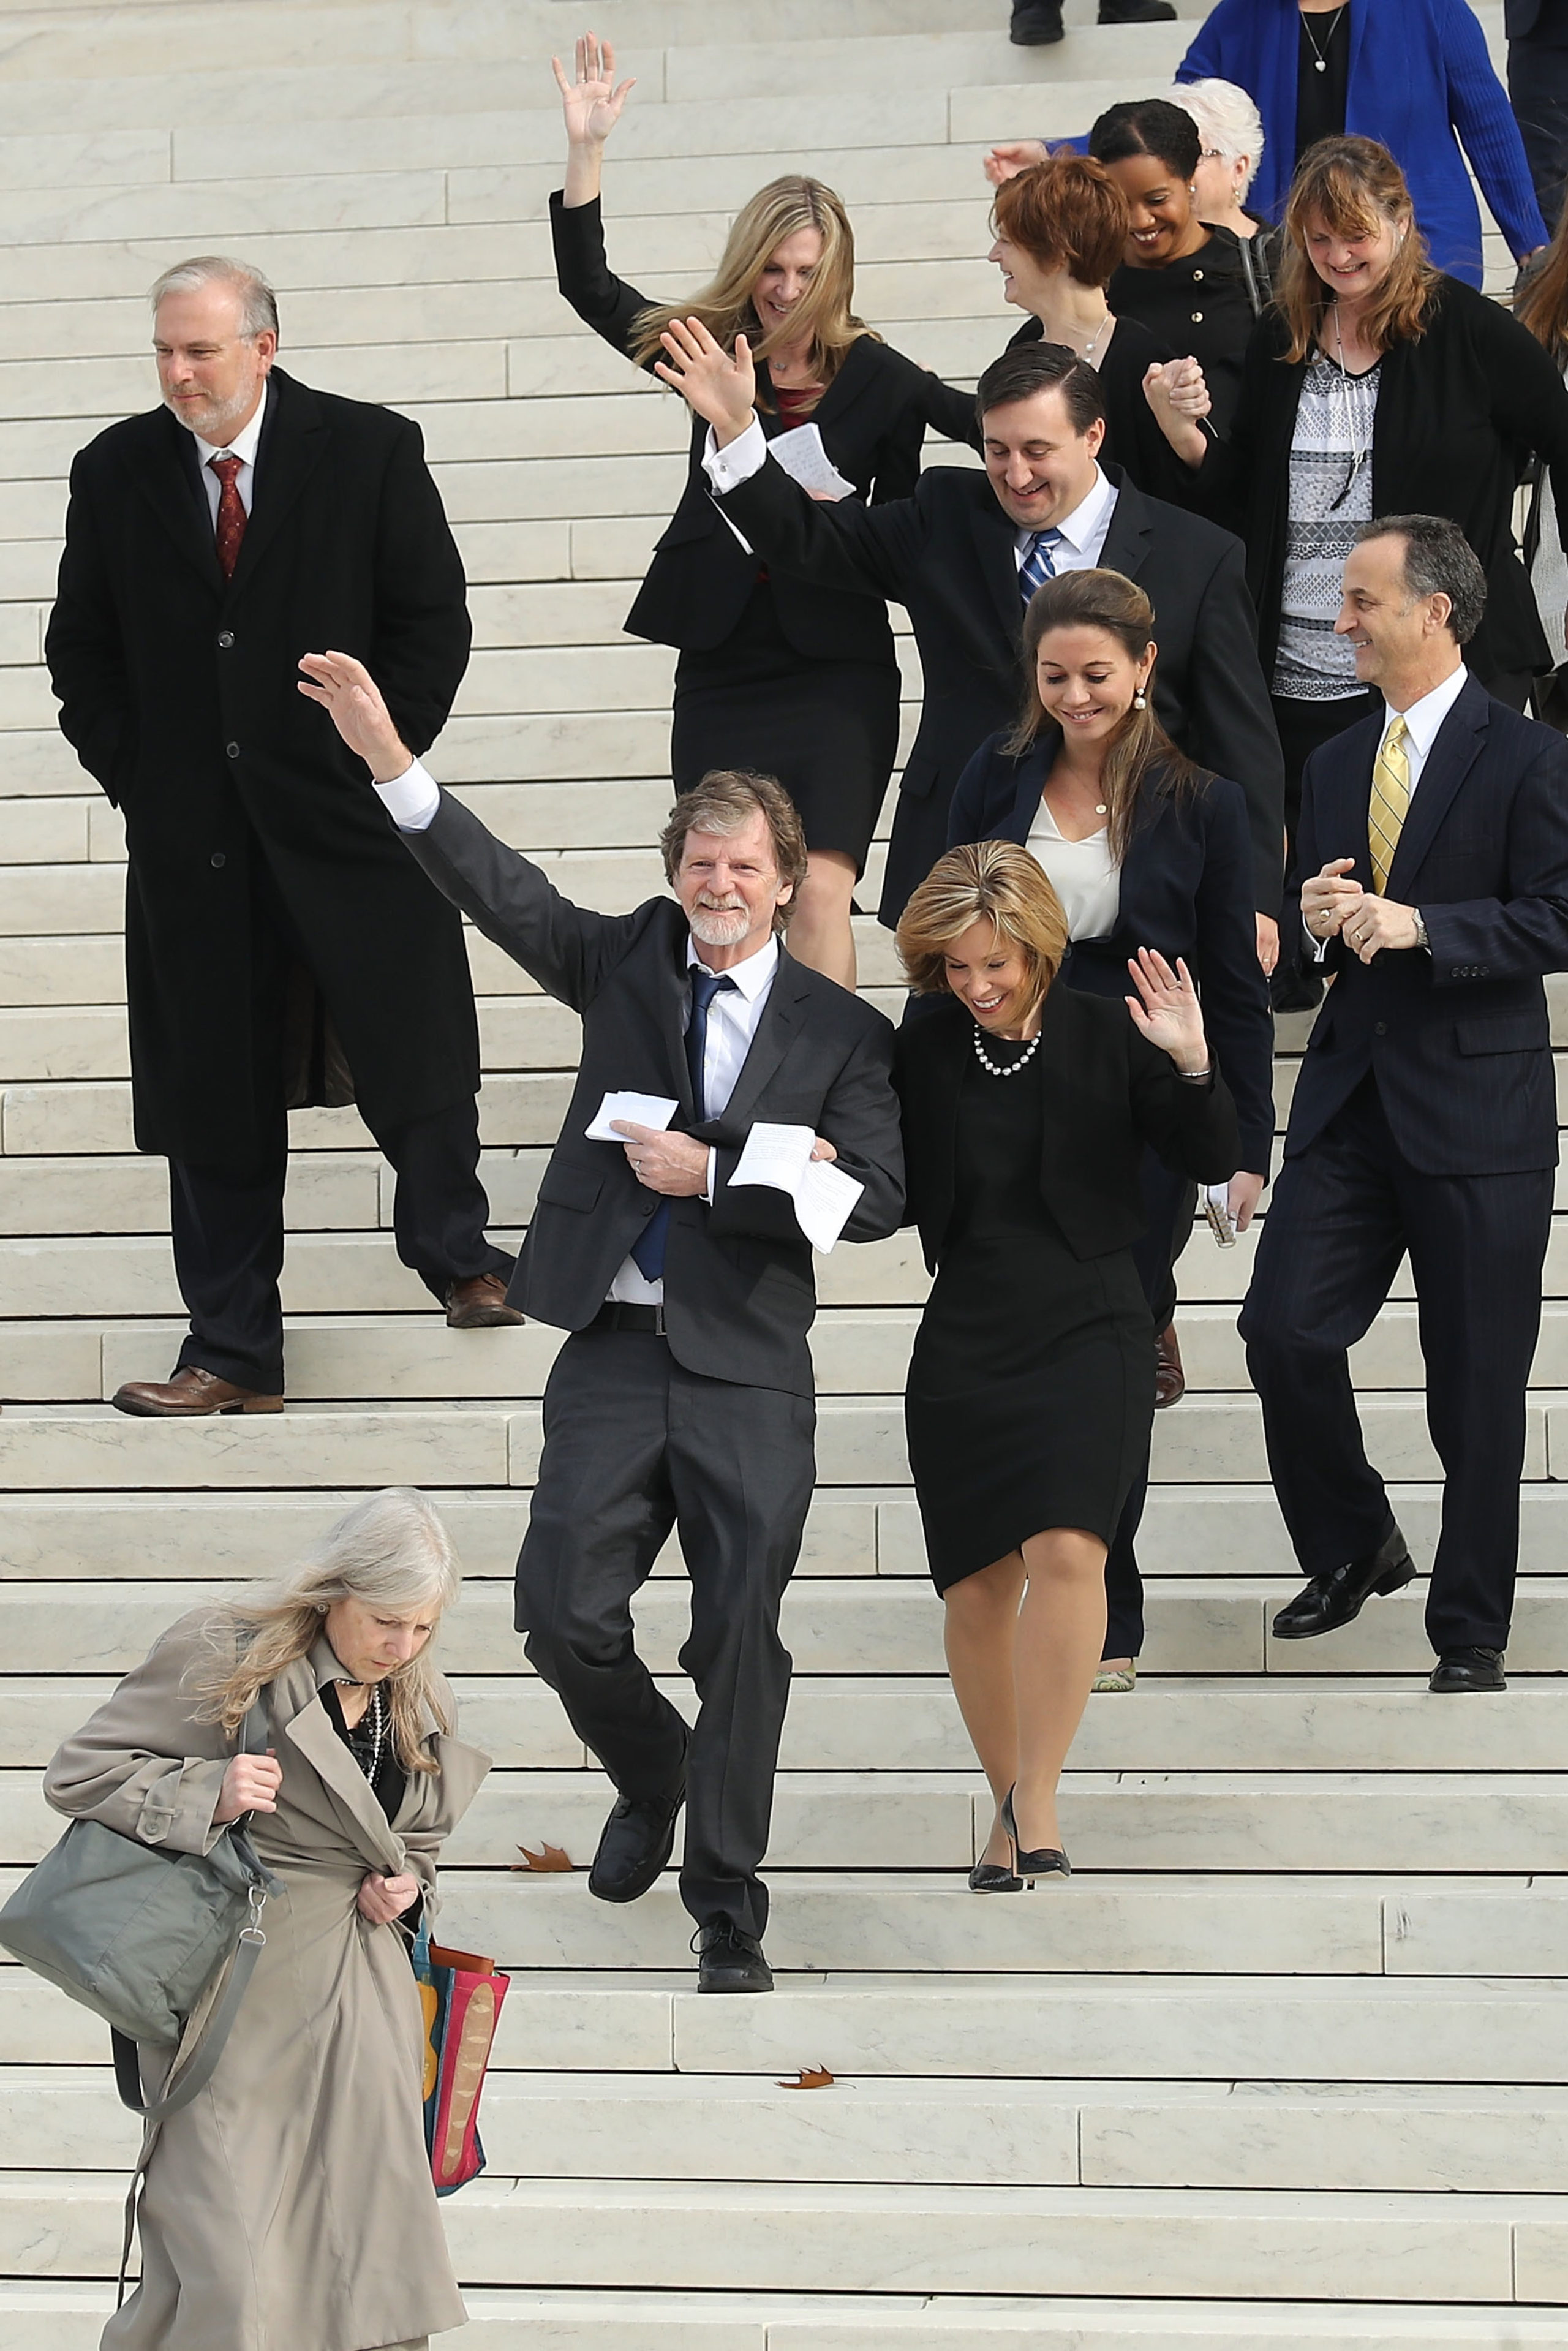 Conservative Christian baker Jack Phillips (3rd L) waves to supporters as he walks out of the U.S. Supreme Court building after the court heard the case Masterpiece Cakeshop v. Colorado Civil Rights Commission December 5, 2017 in Washington, DC. Siting his religious beliefs, Phillips refused to sell a gay couple a wedding cake for their same-sex ceremony in 2012, beginning a legal battle over freedom of speech and religion. (Photo by Chip Somodevilla/Getty Images)